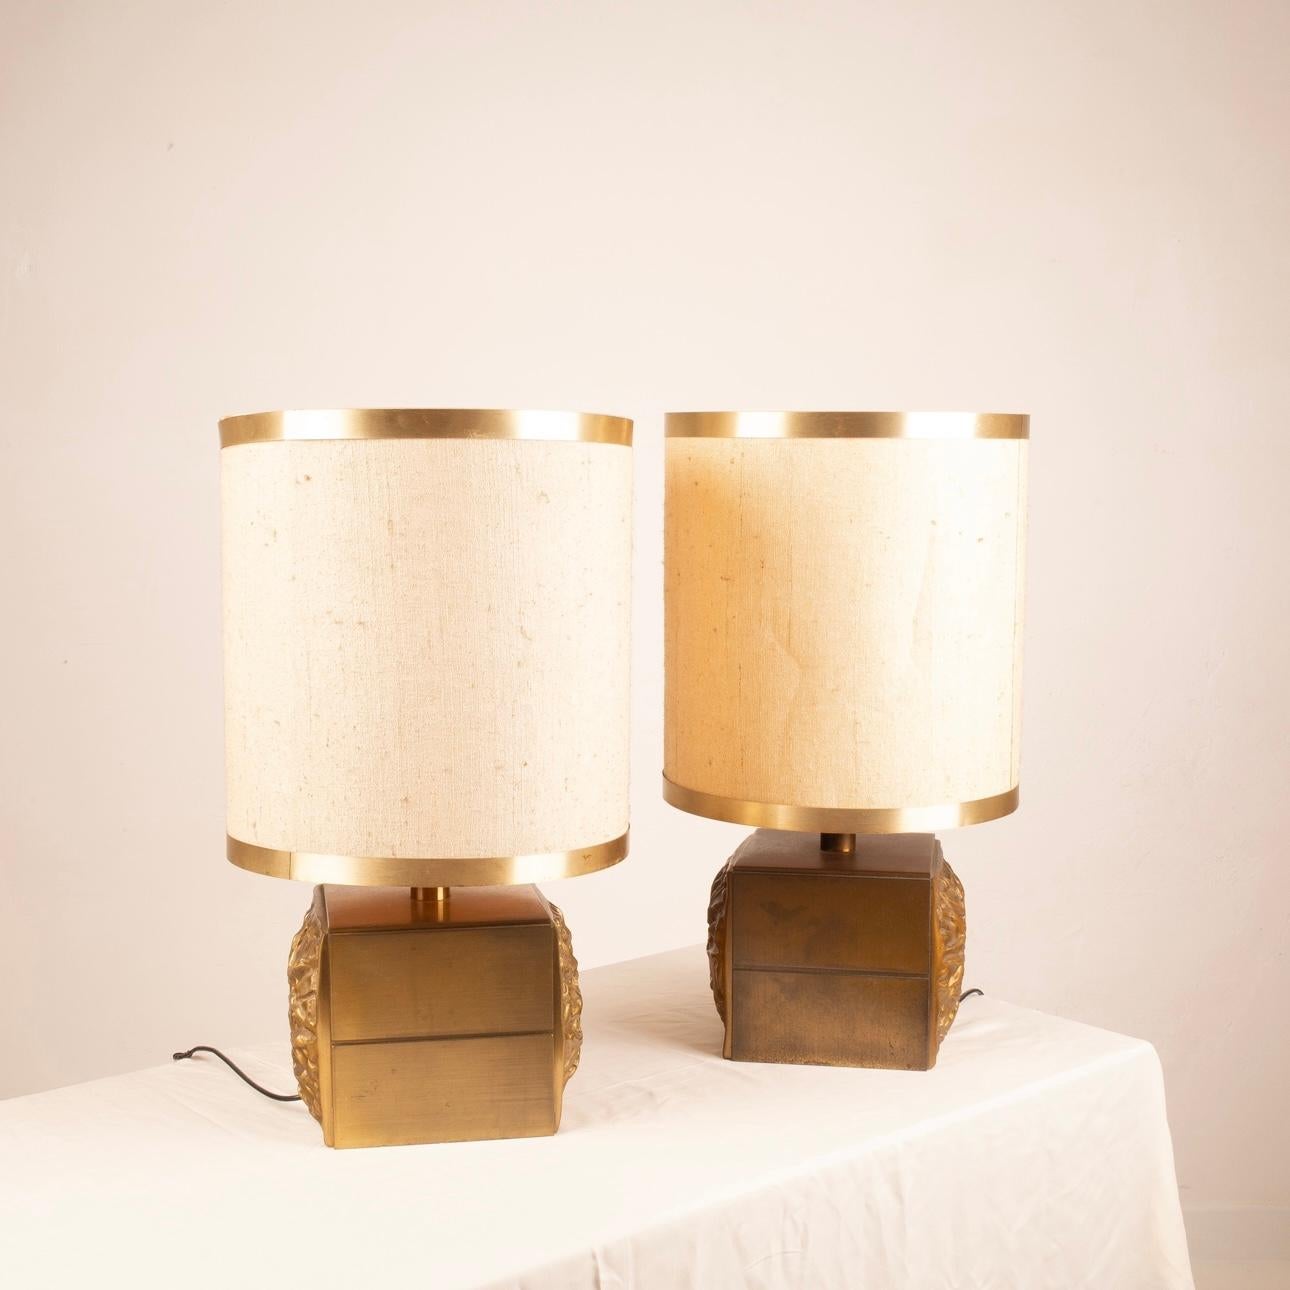 Pair of Brutalist Lamps by Luciano Frigerio for Frigerio of Desio For Sale 3